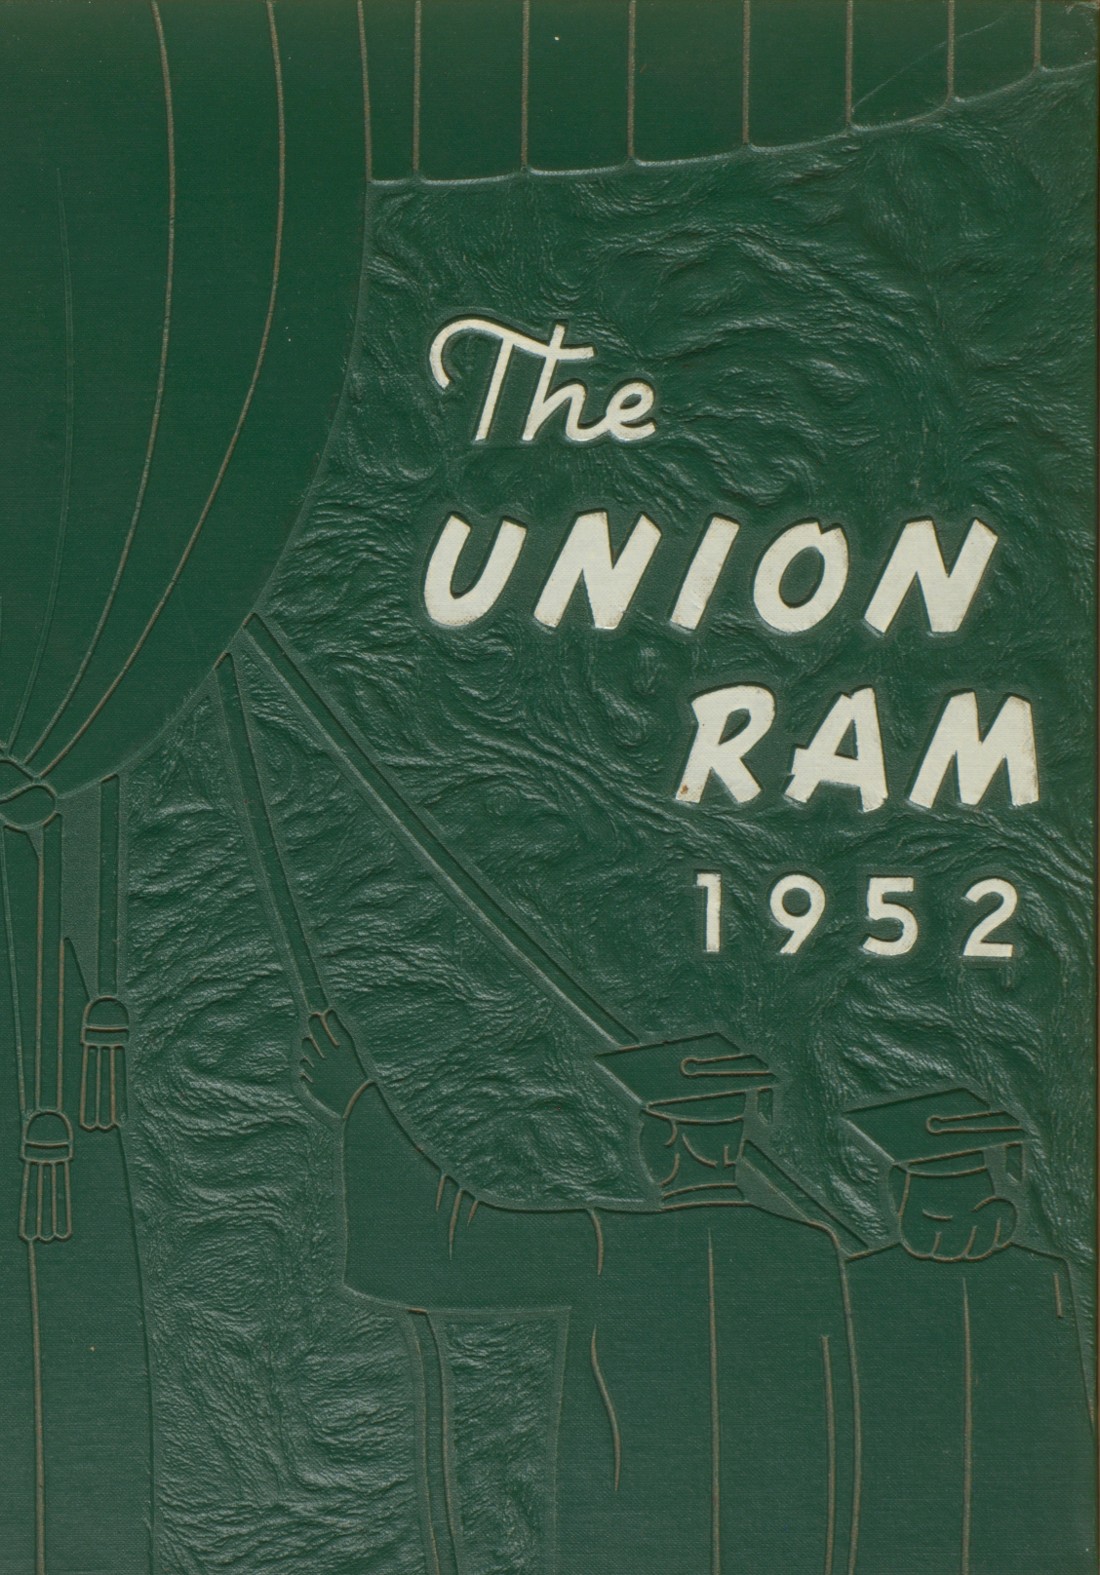 1952 yearbook from Union High School from Rimersburg, Pennsylvania for sale